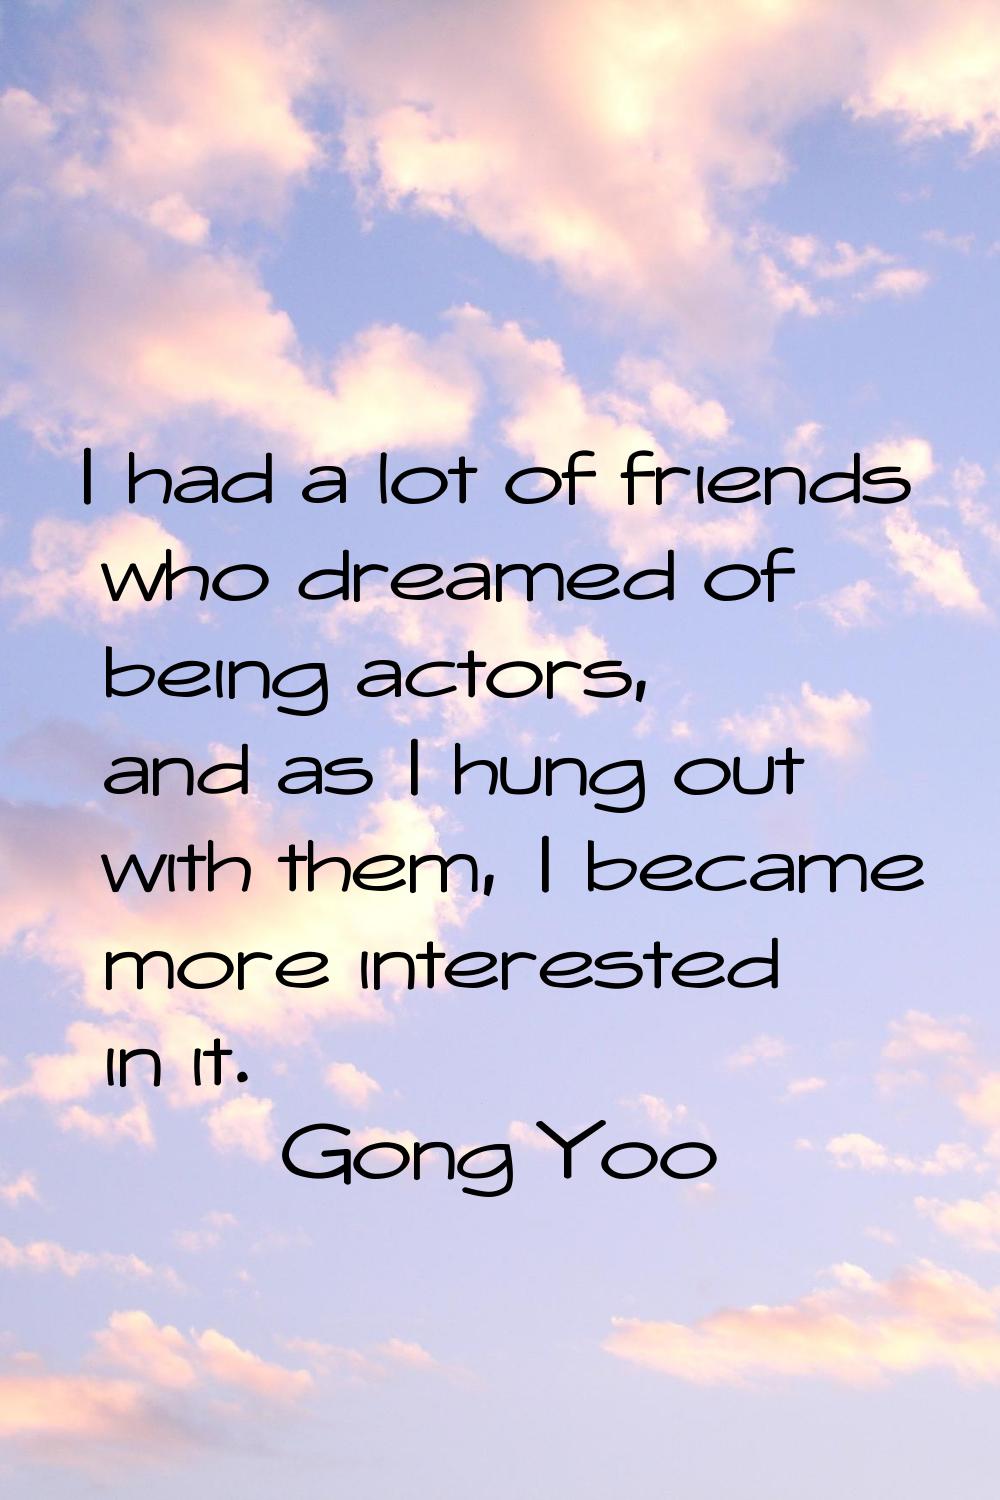 I had a lot of friends who dreamed of being actors, and as I hung out with them, I became more inte